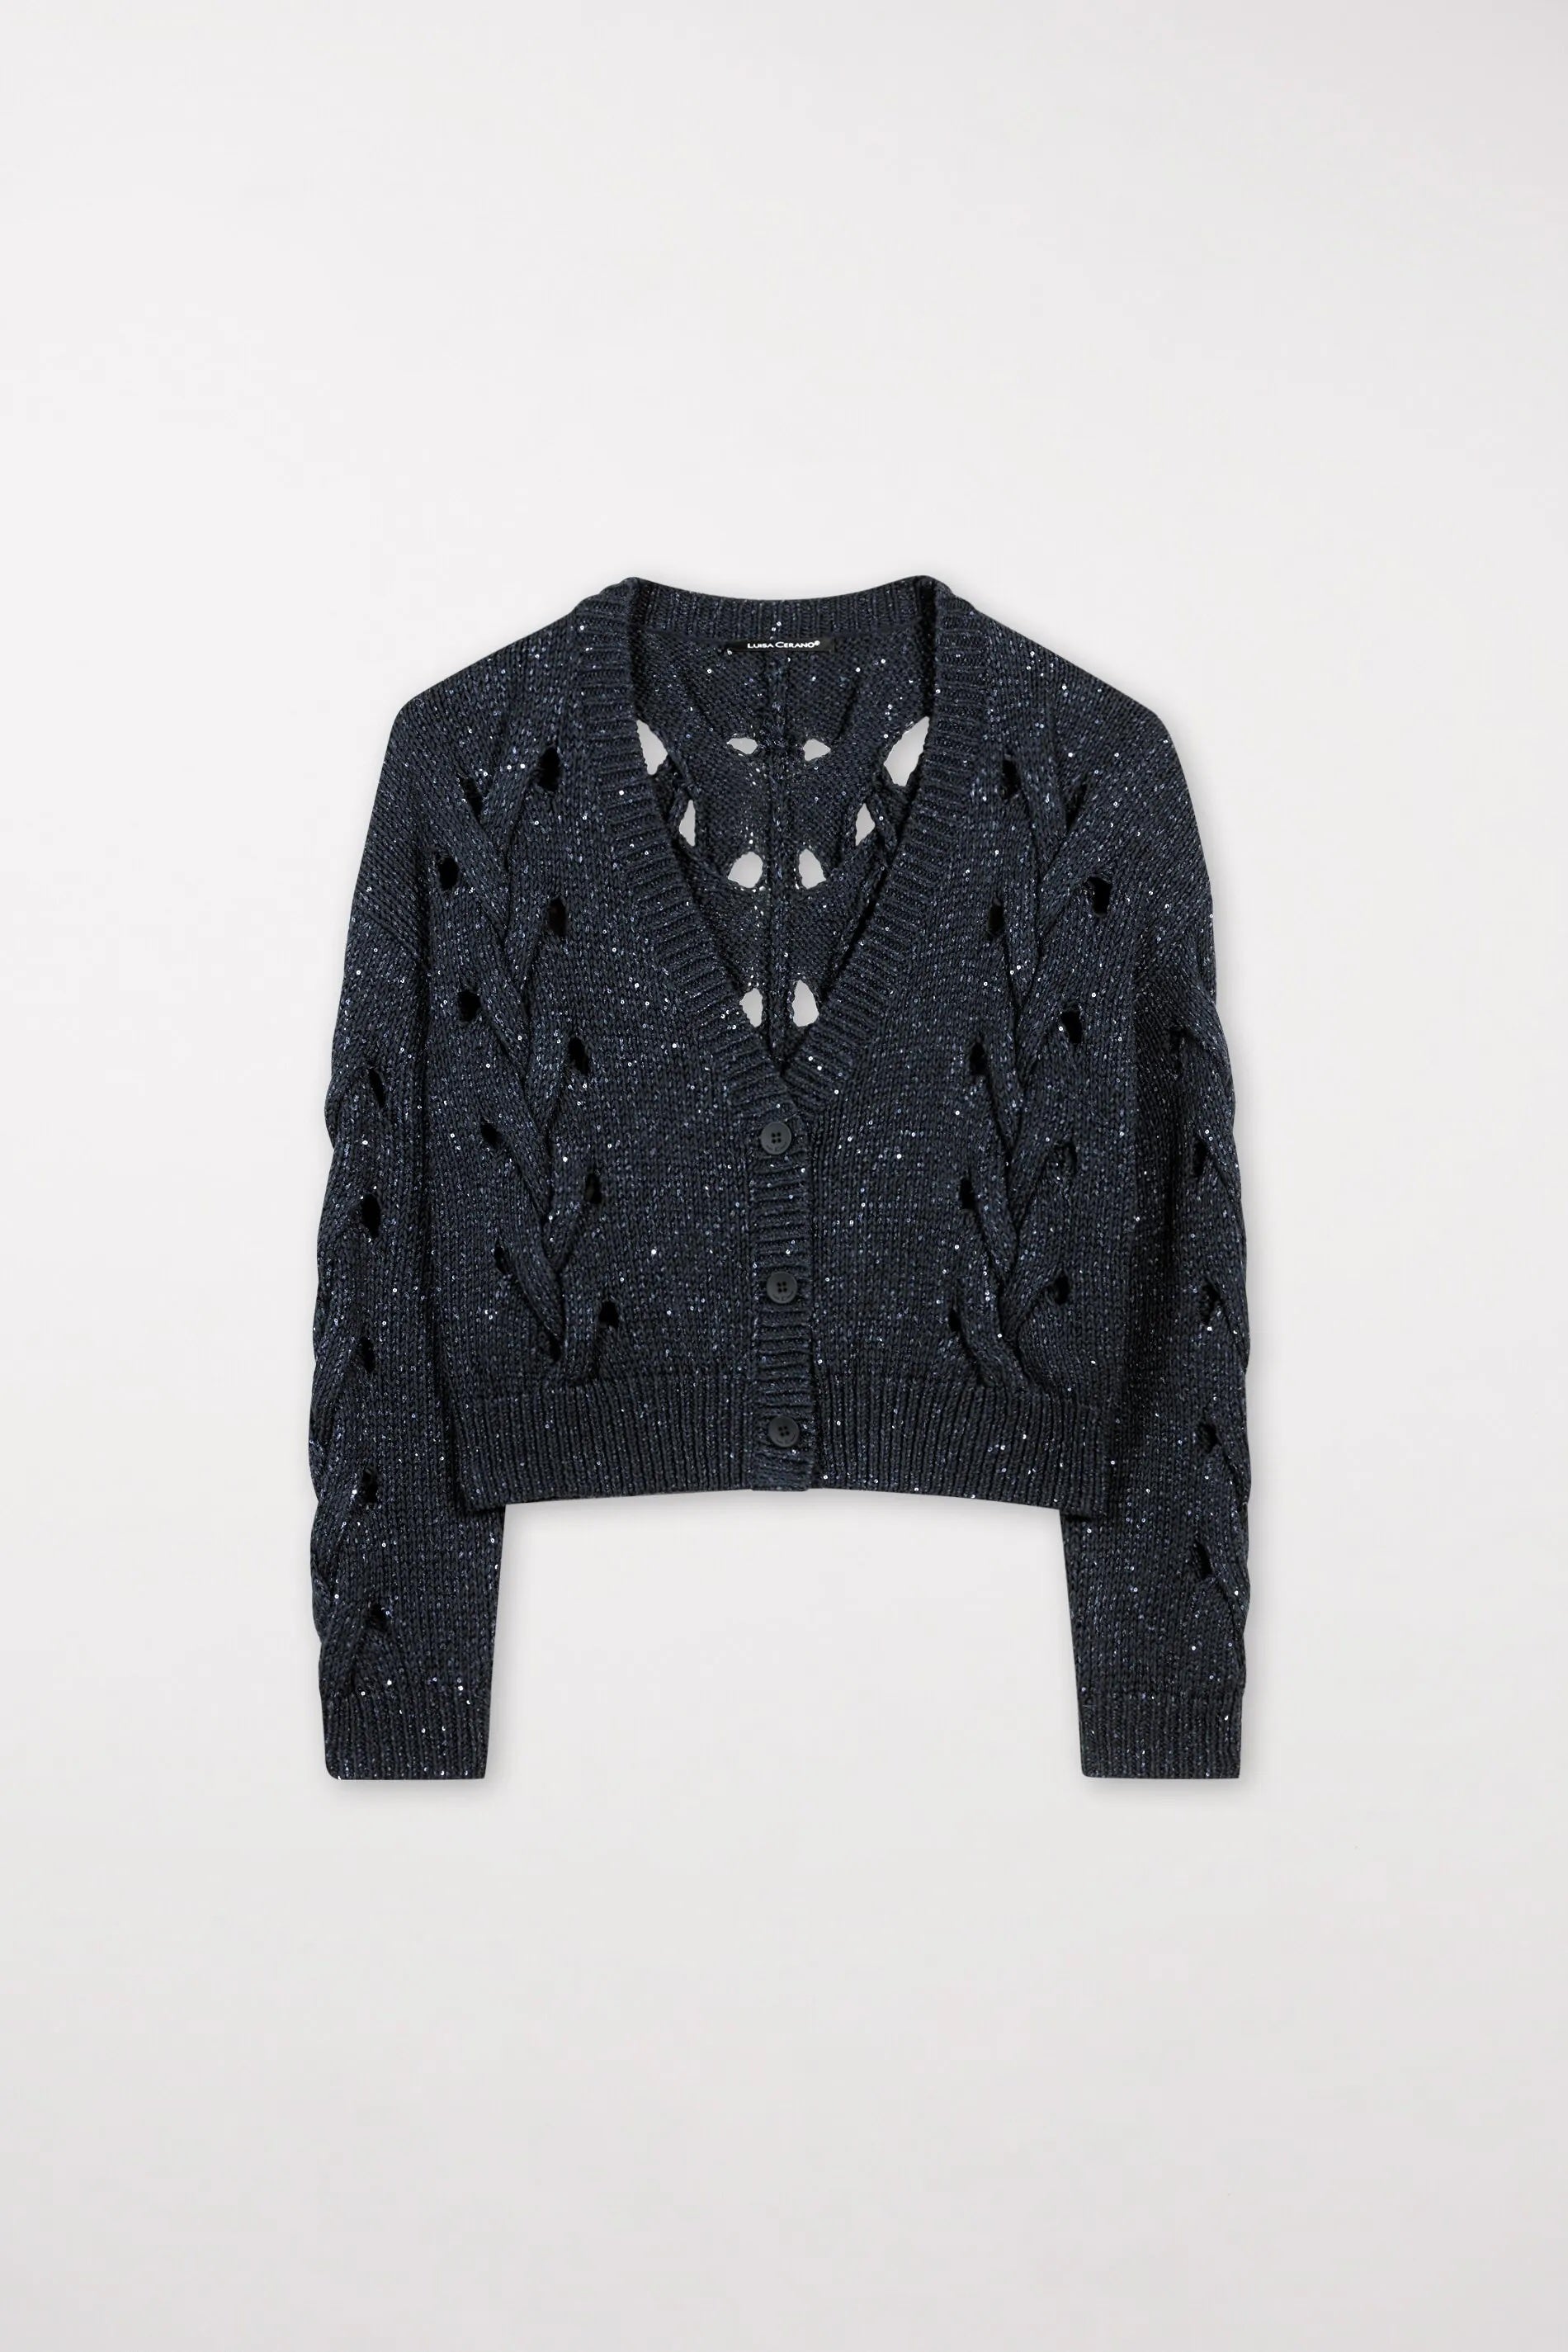 Dark Navy Sequin Cable Knit Cardigan